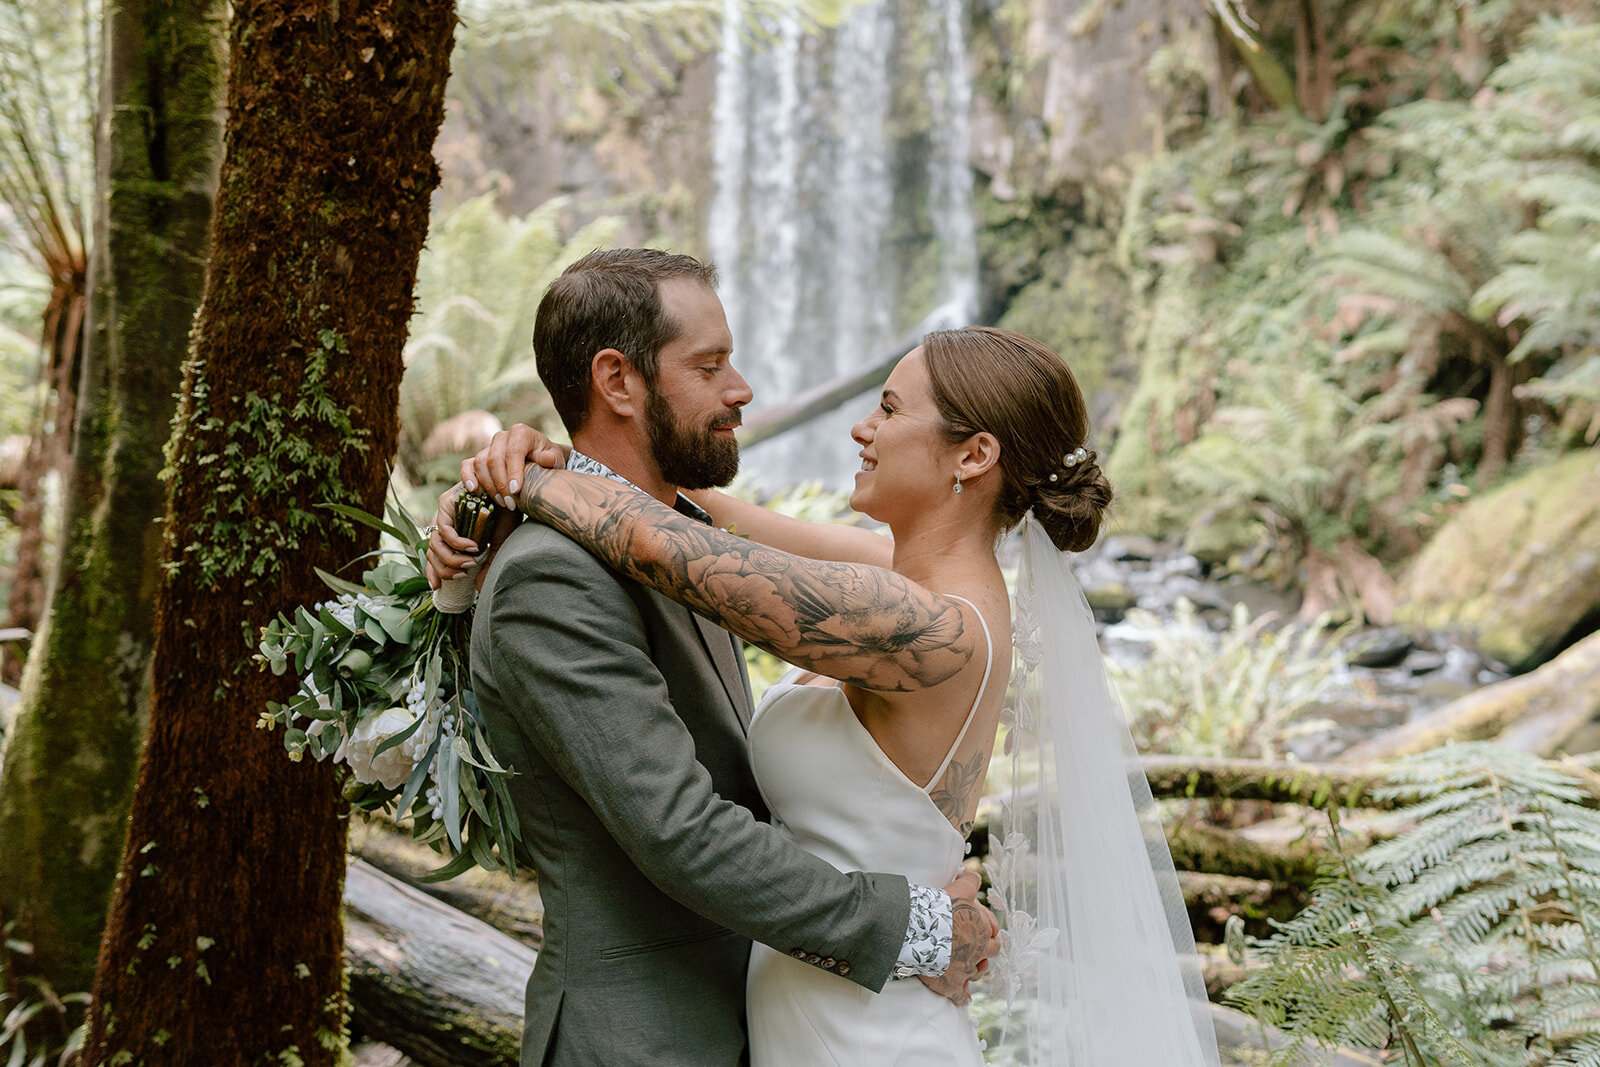 Stacey&Cory-Coast&Pines-306